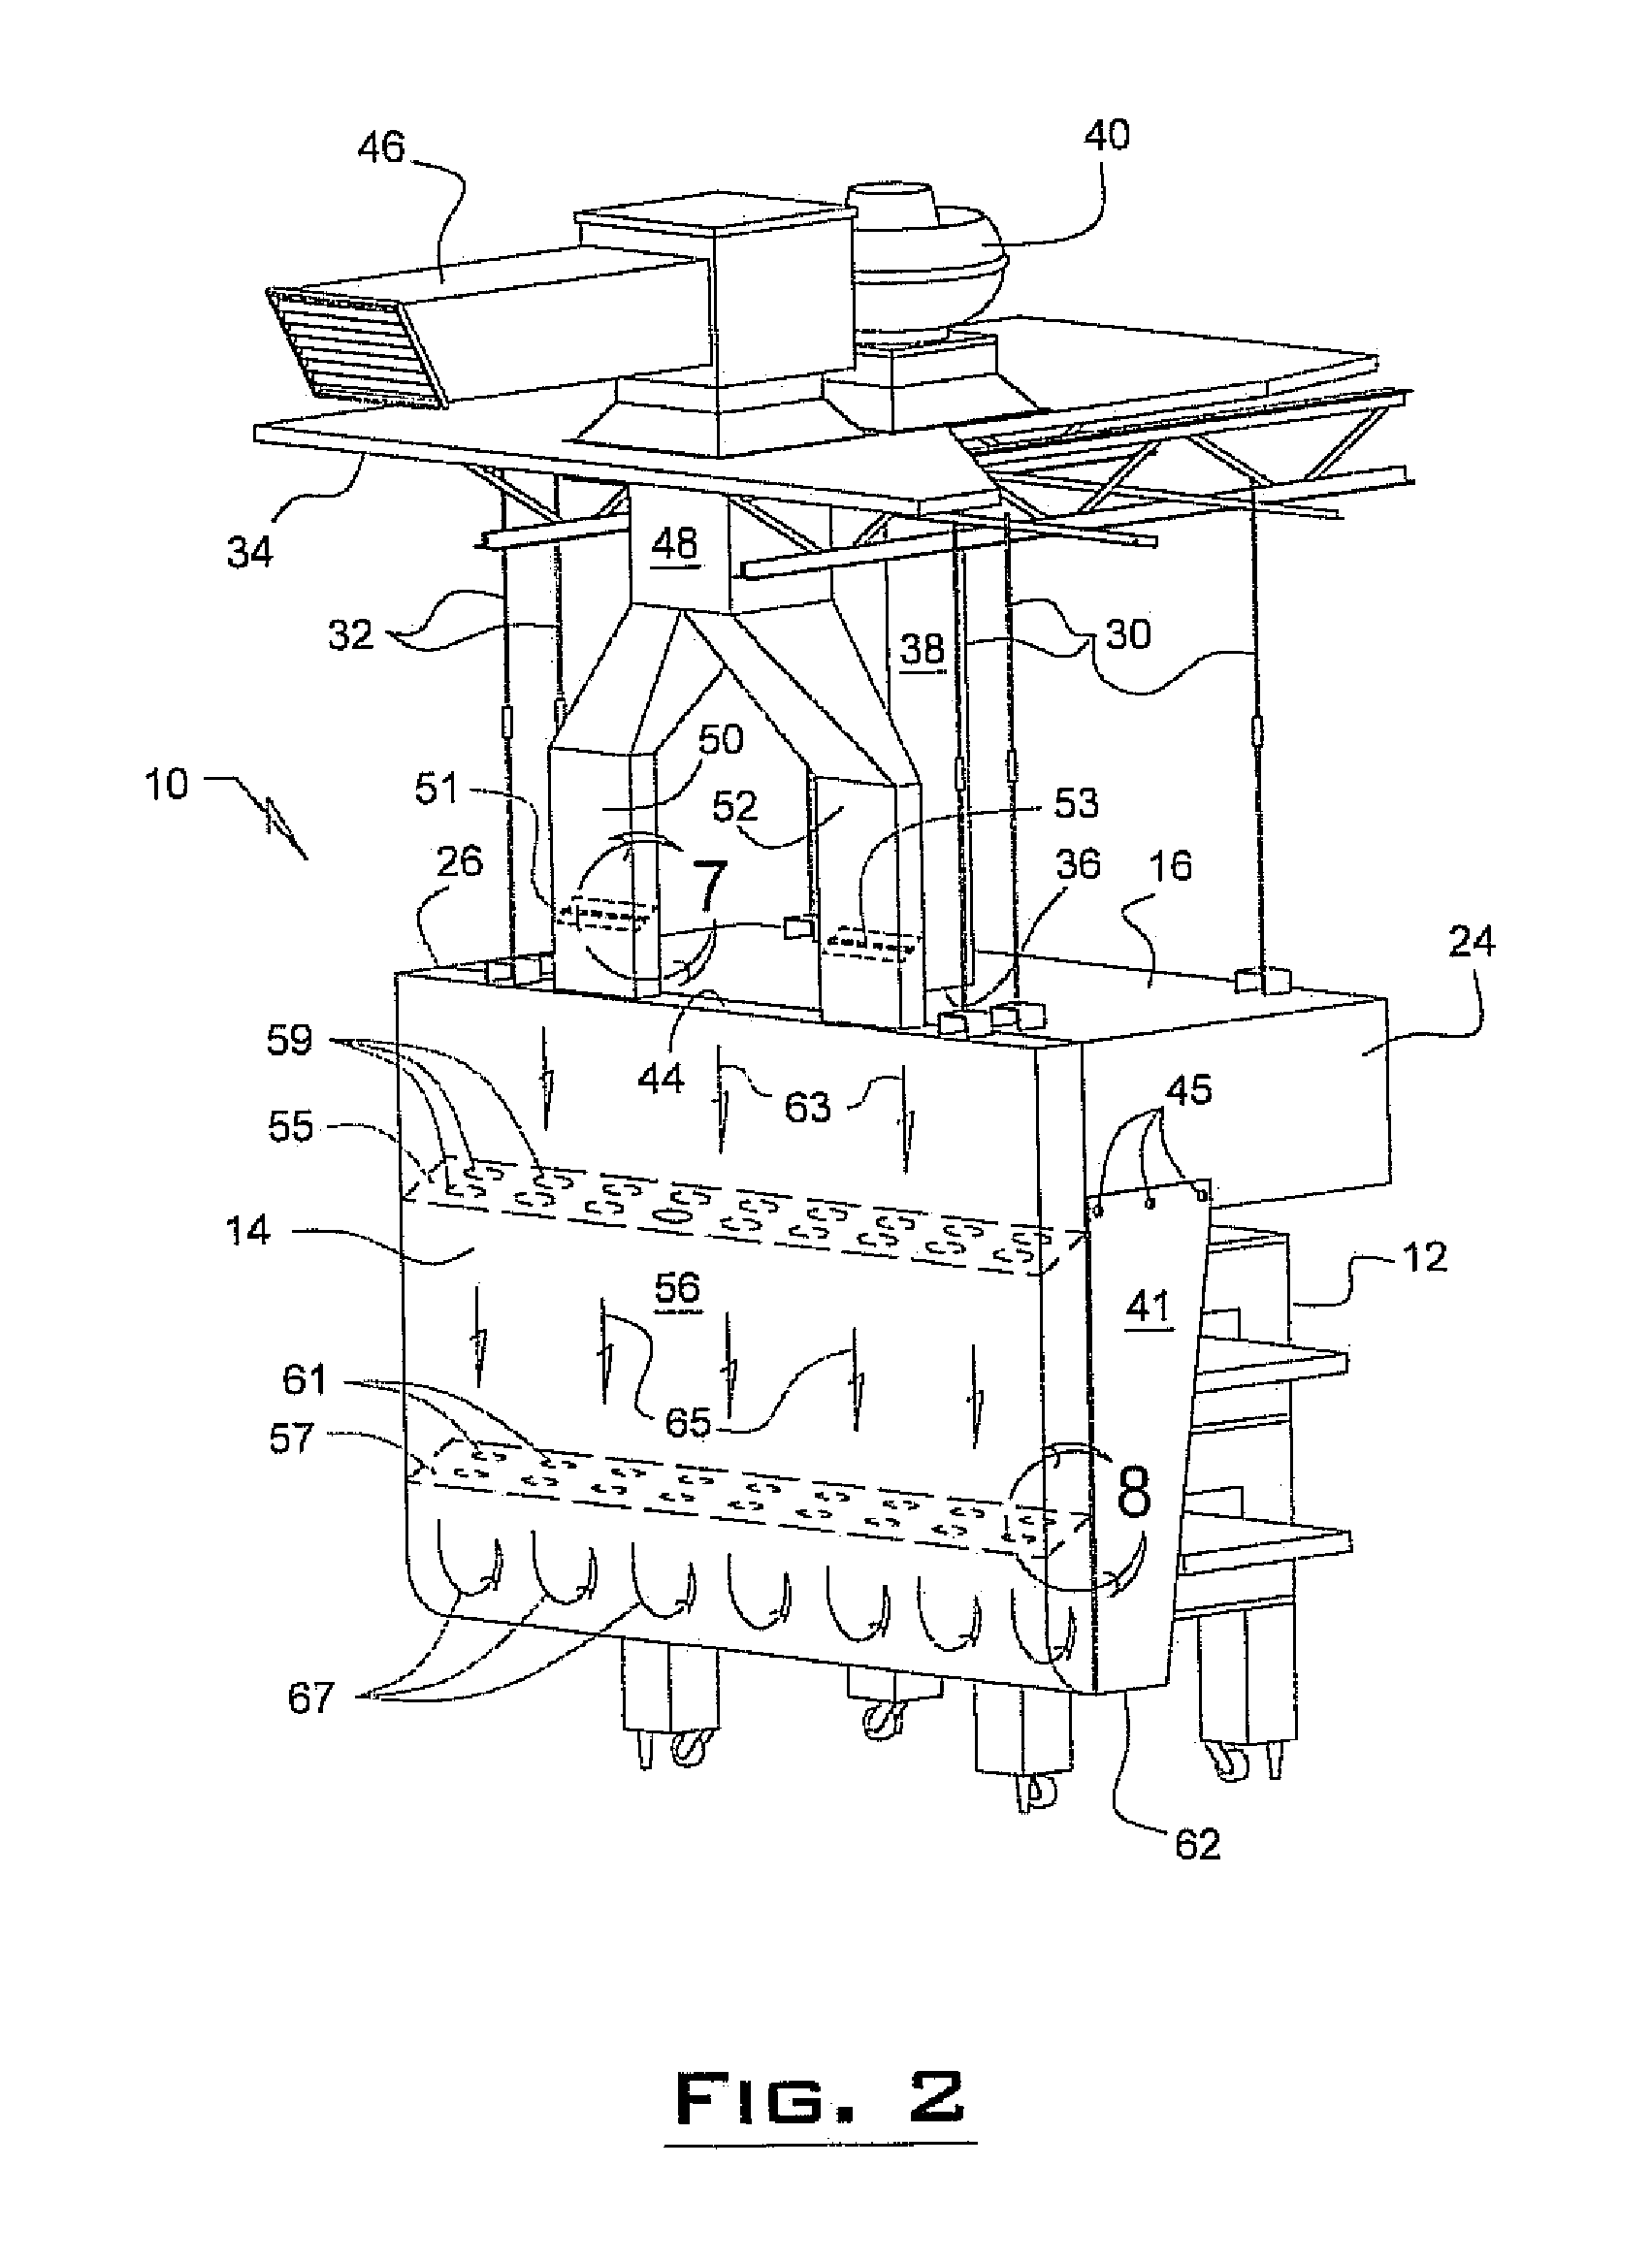 Overhead ventilation system incorporating a downwardly configured rear supply plenum with upward configured directional outlet and including baffle plates and dampeners incorporated into the plenum for evenly distributing an inlet airflow through the plenum outlet